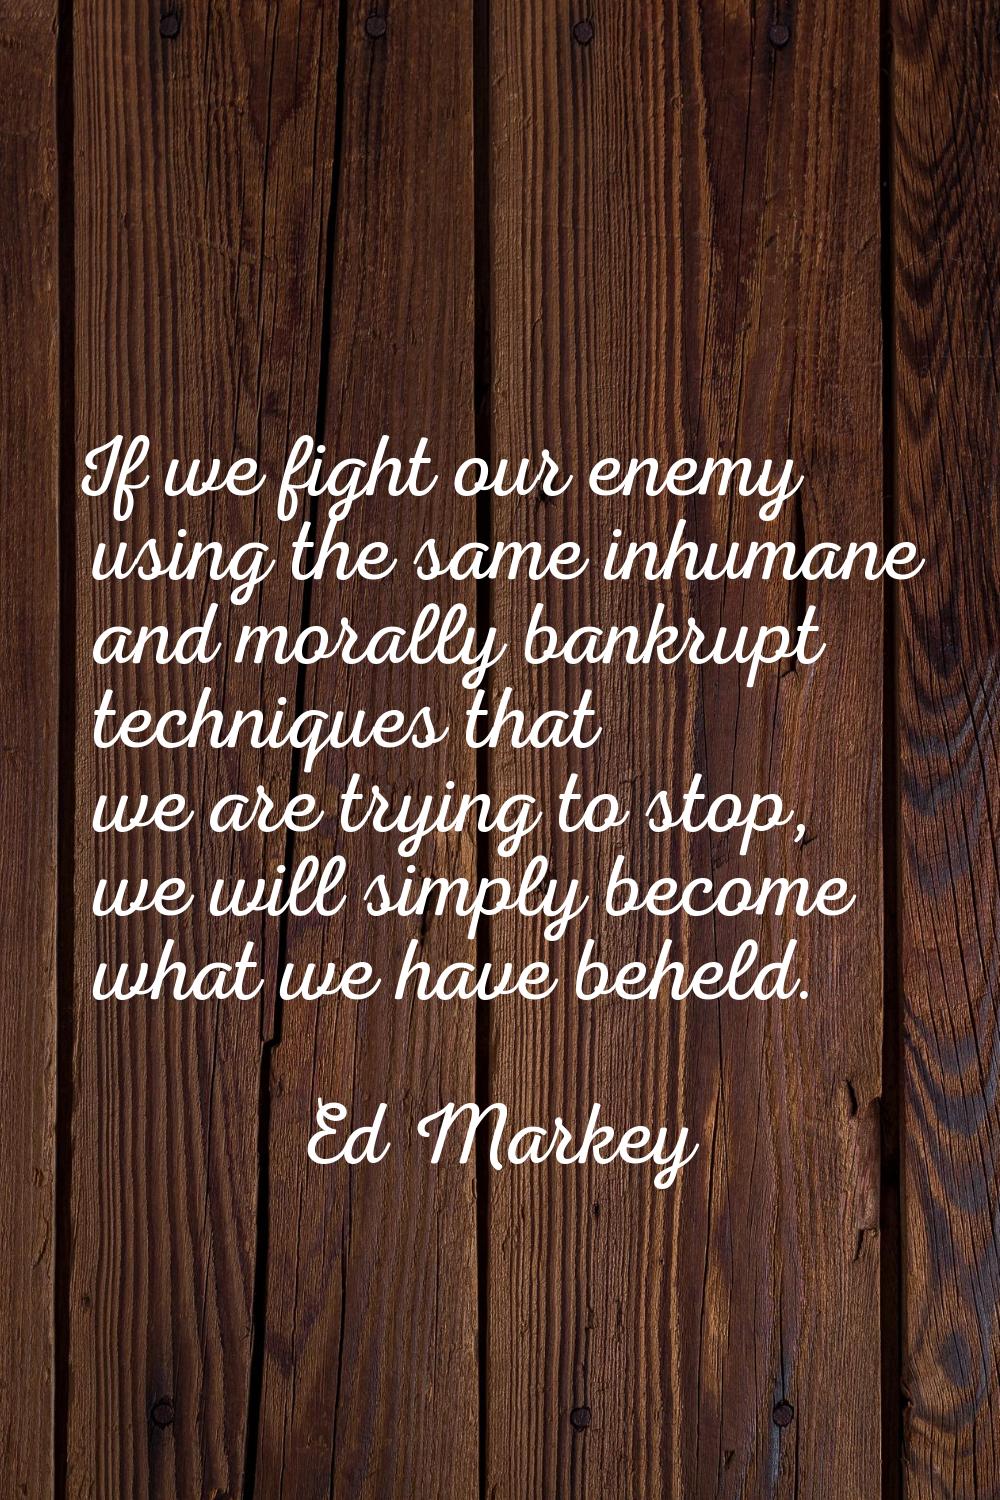 If we fight our enemy using the same inhumane and morally bankrupt techniques that we are trying to